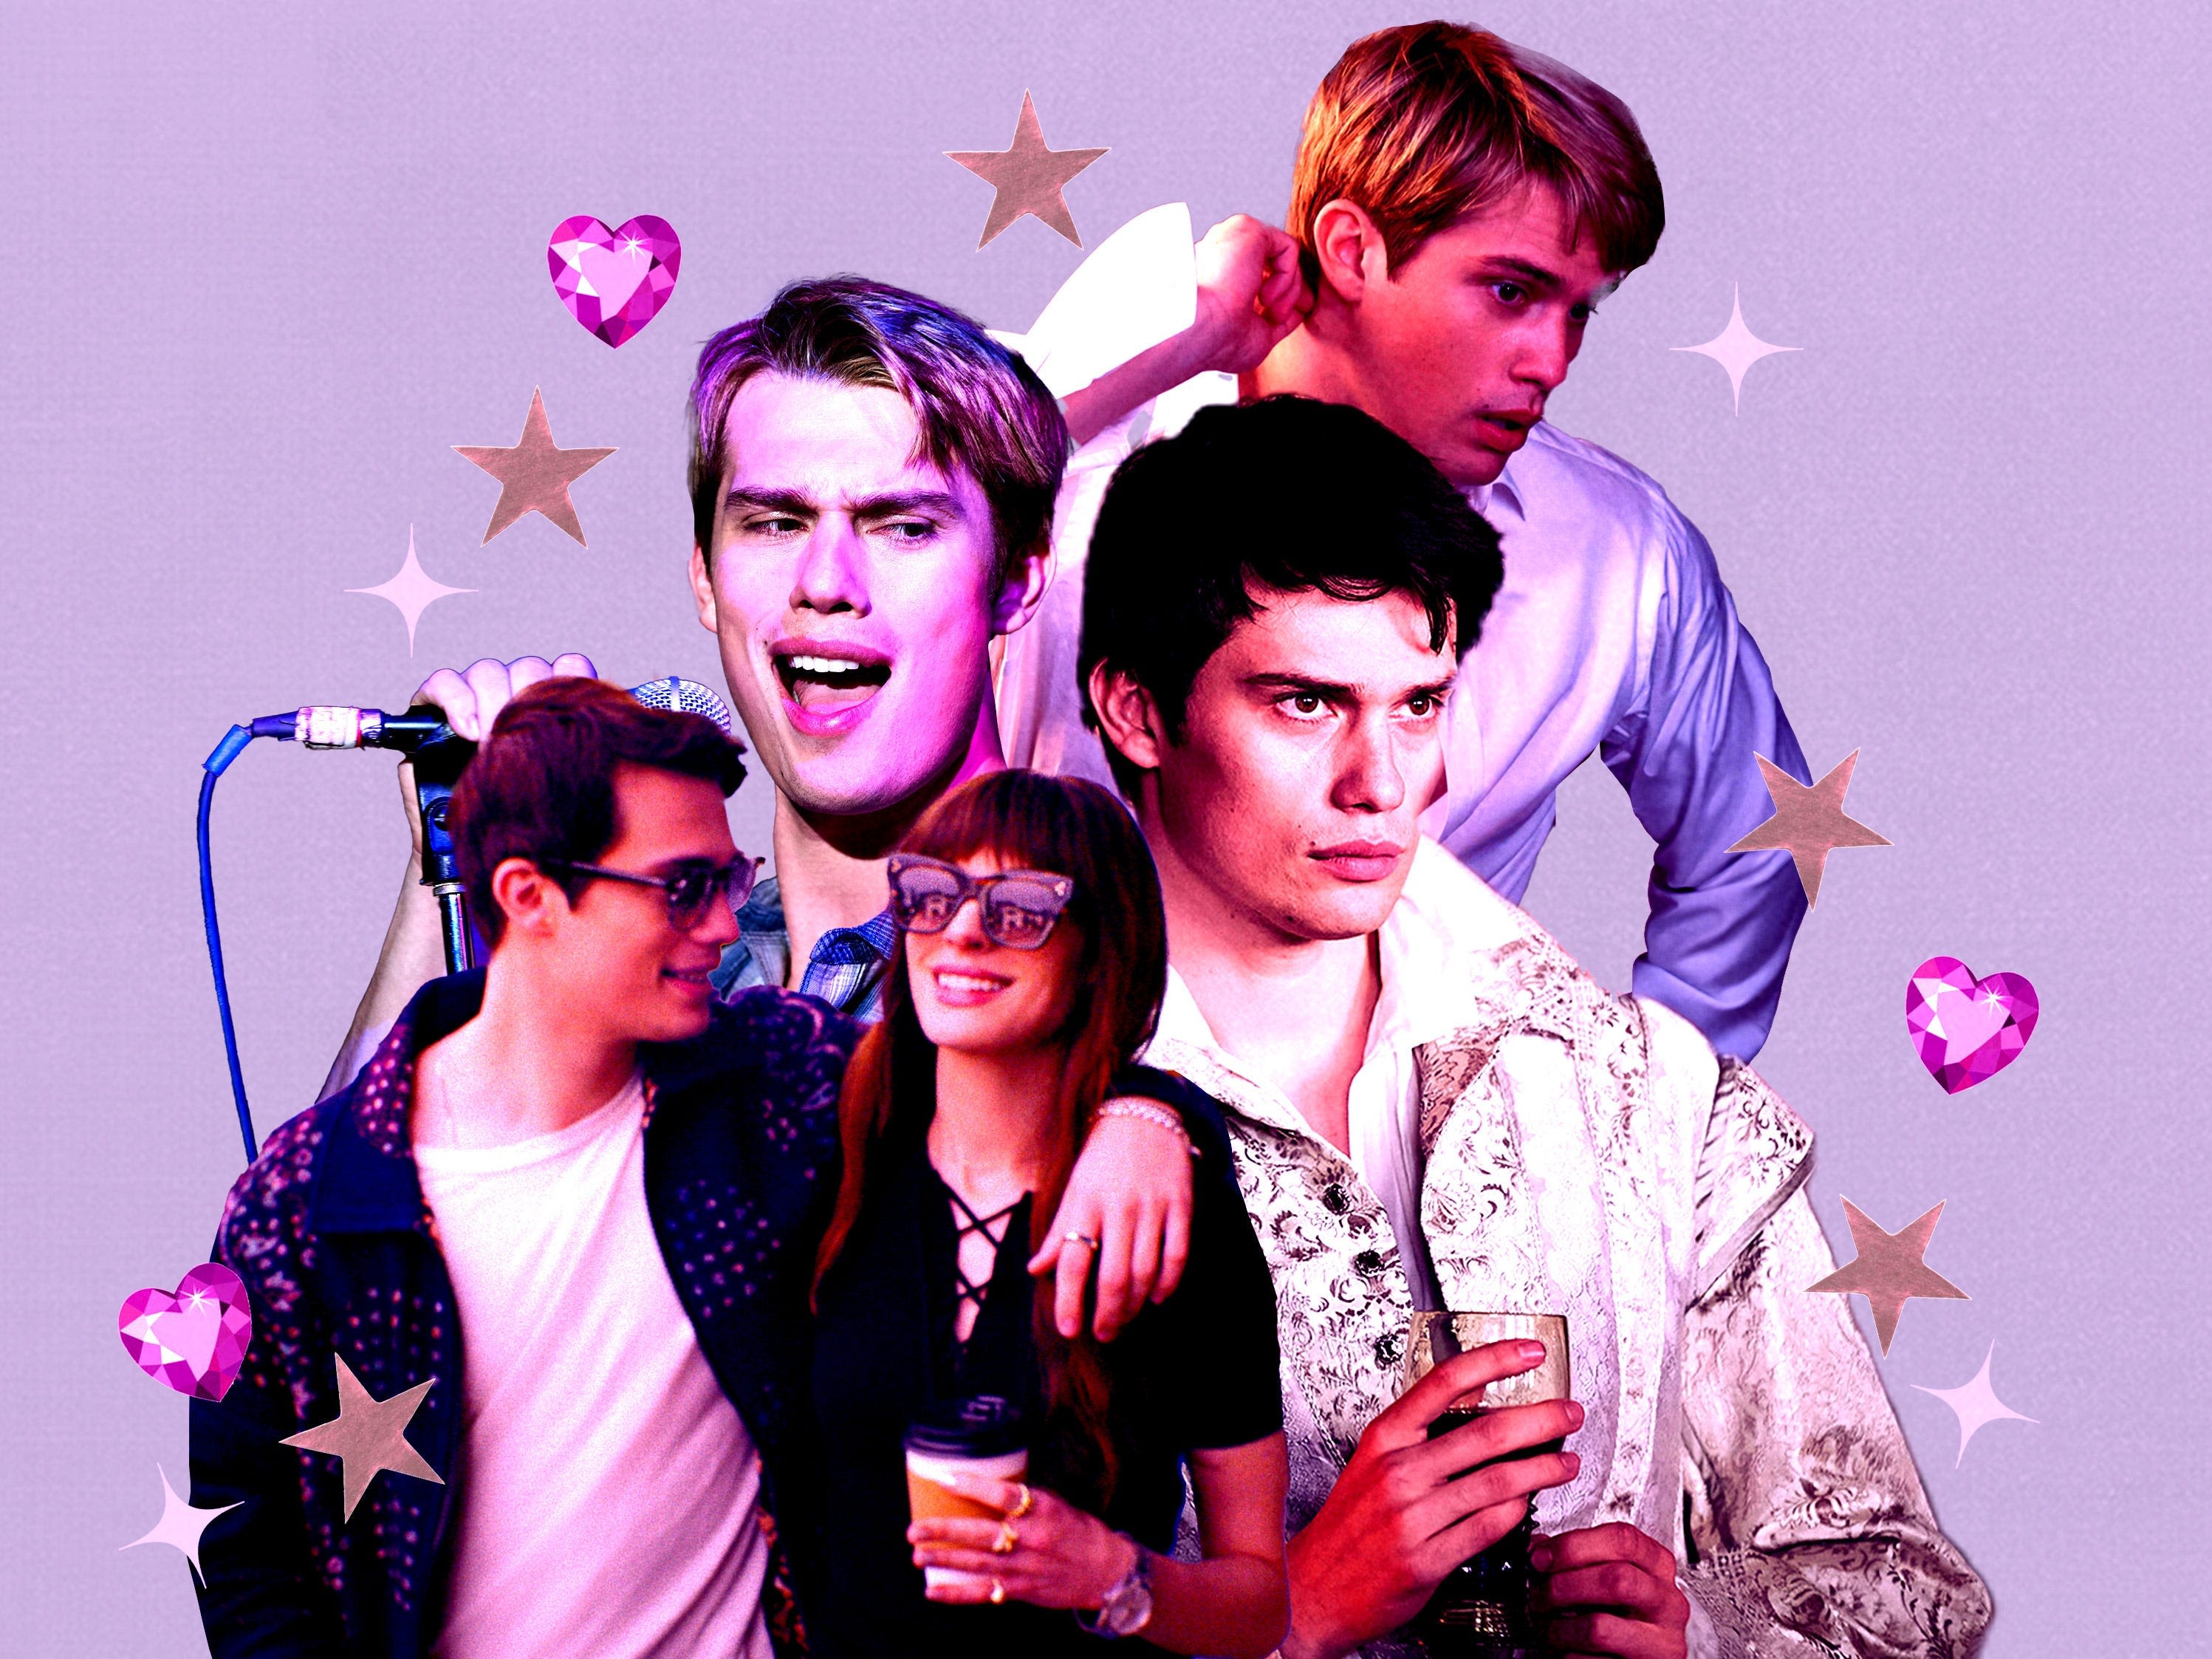 A new era of heartthrob is here, and Nicholas Galitzine is its poster boy